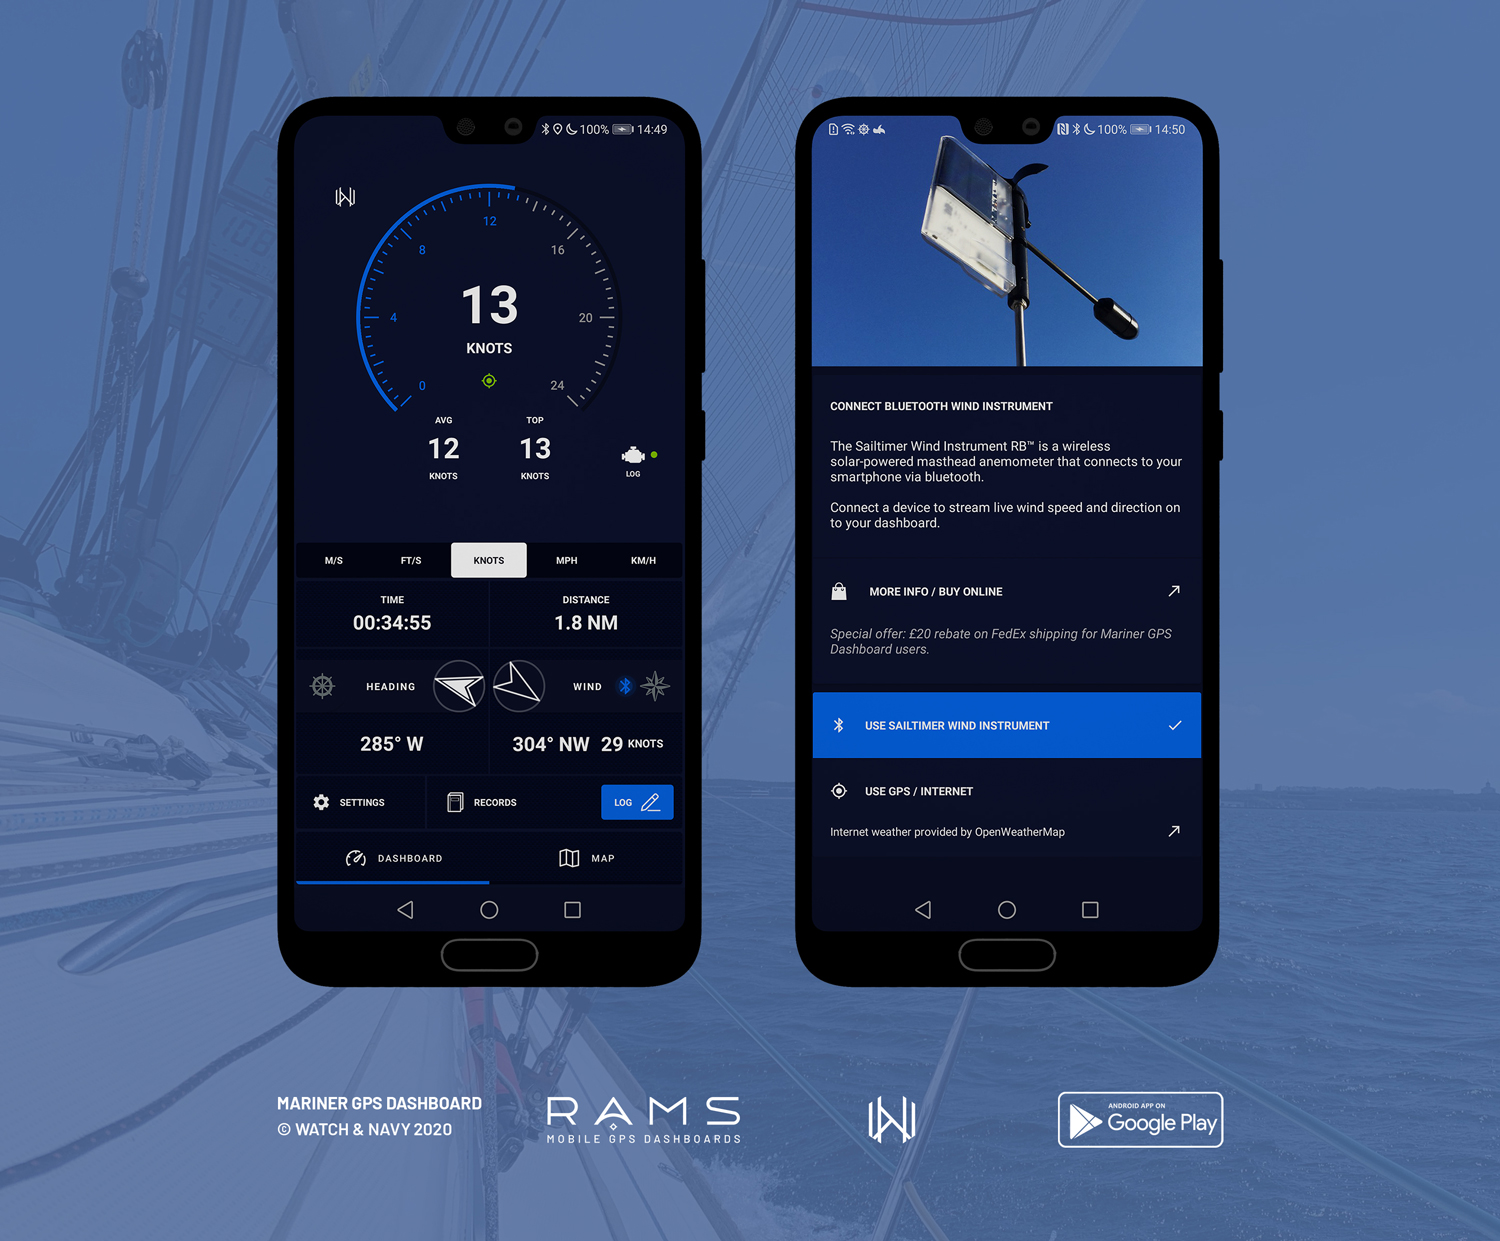 Puede ser ignorado Penetrar Exitoso Mariner GPS Dashboard 3.1.4 — Stream Real-Time Wind Speed and Direction  over Bluetooth with the SailTimer Wind Instrument RB™ - Watch & Navy